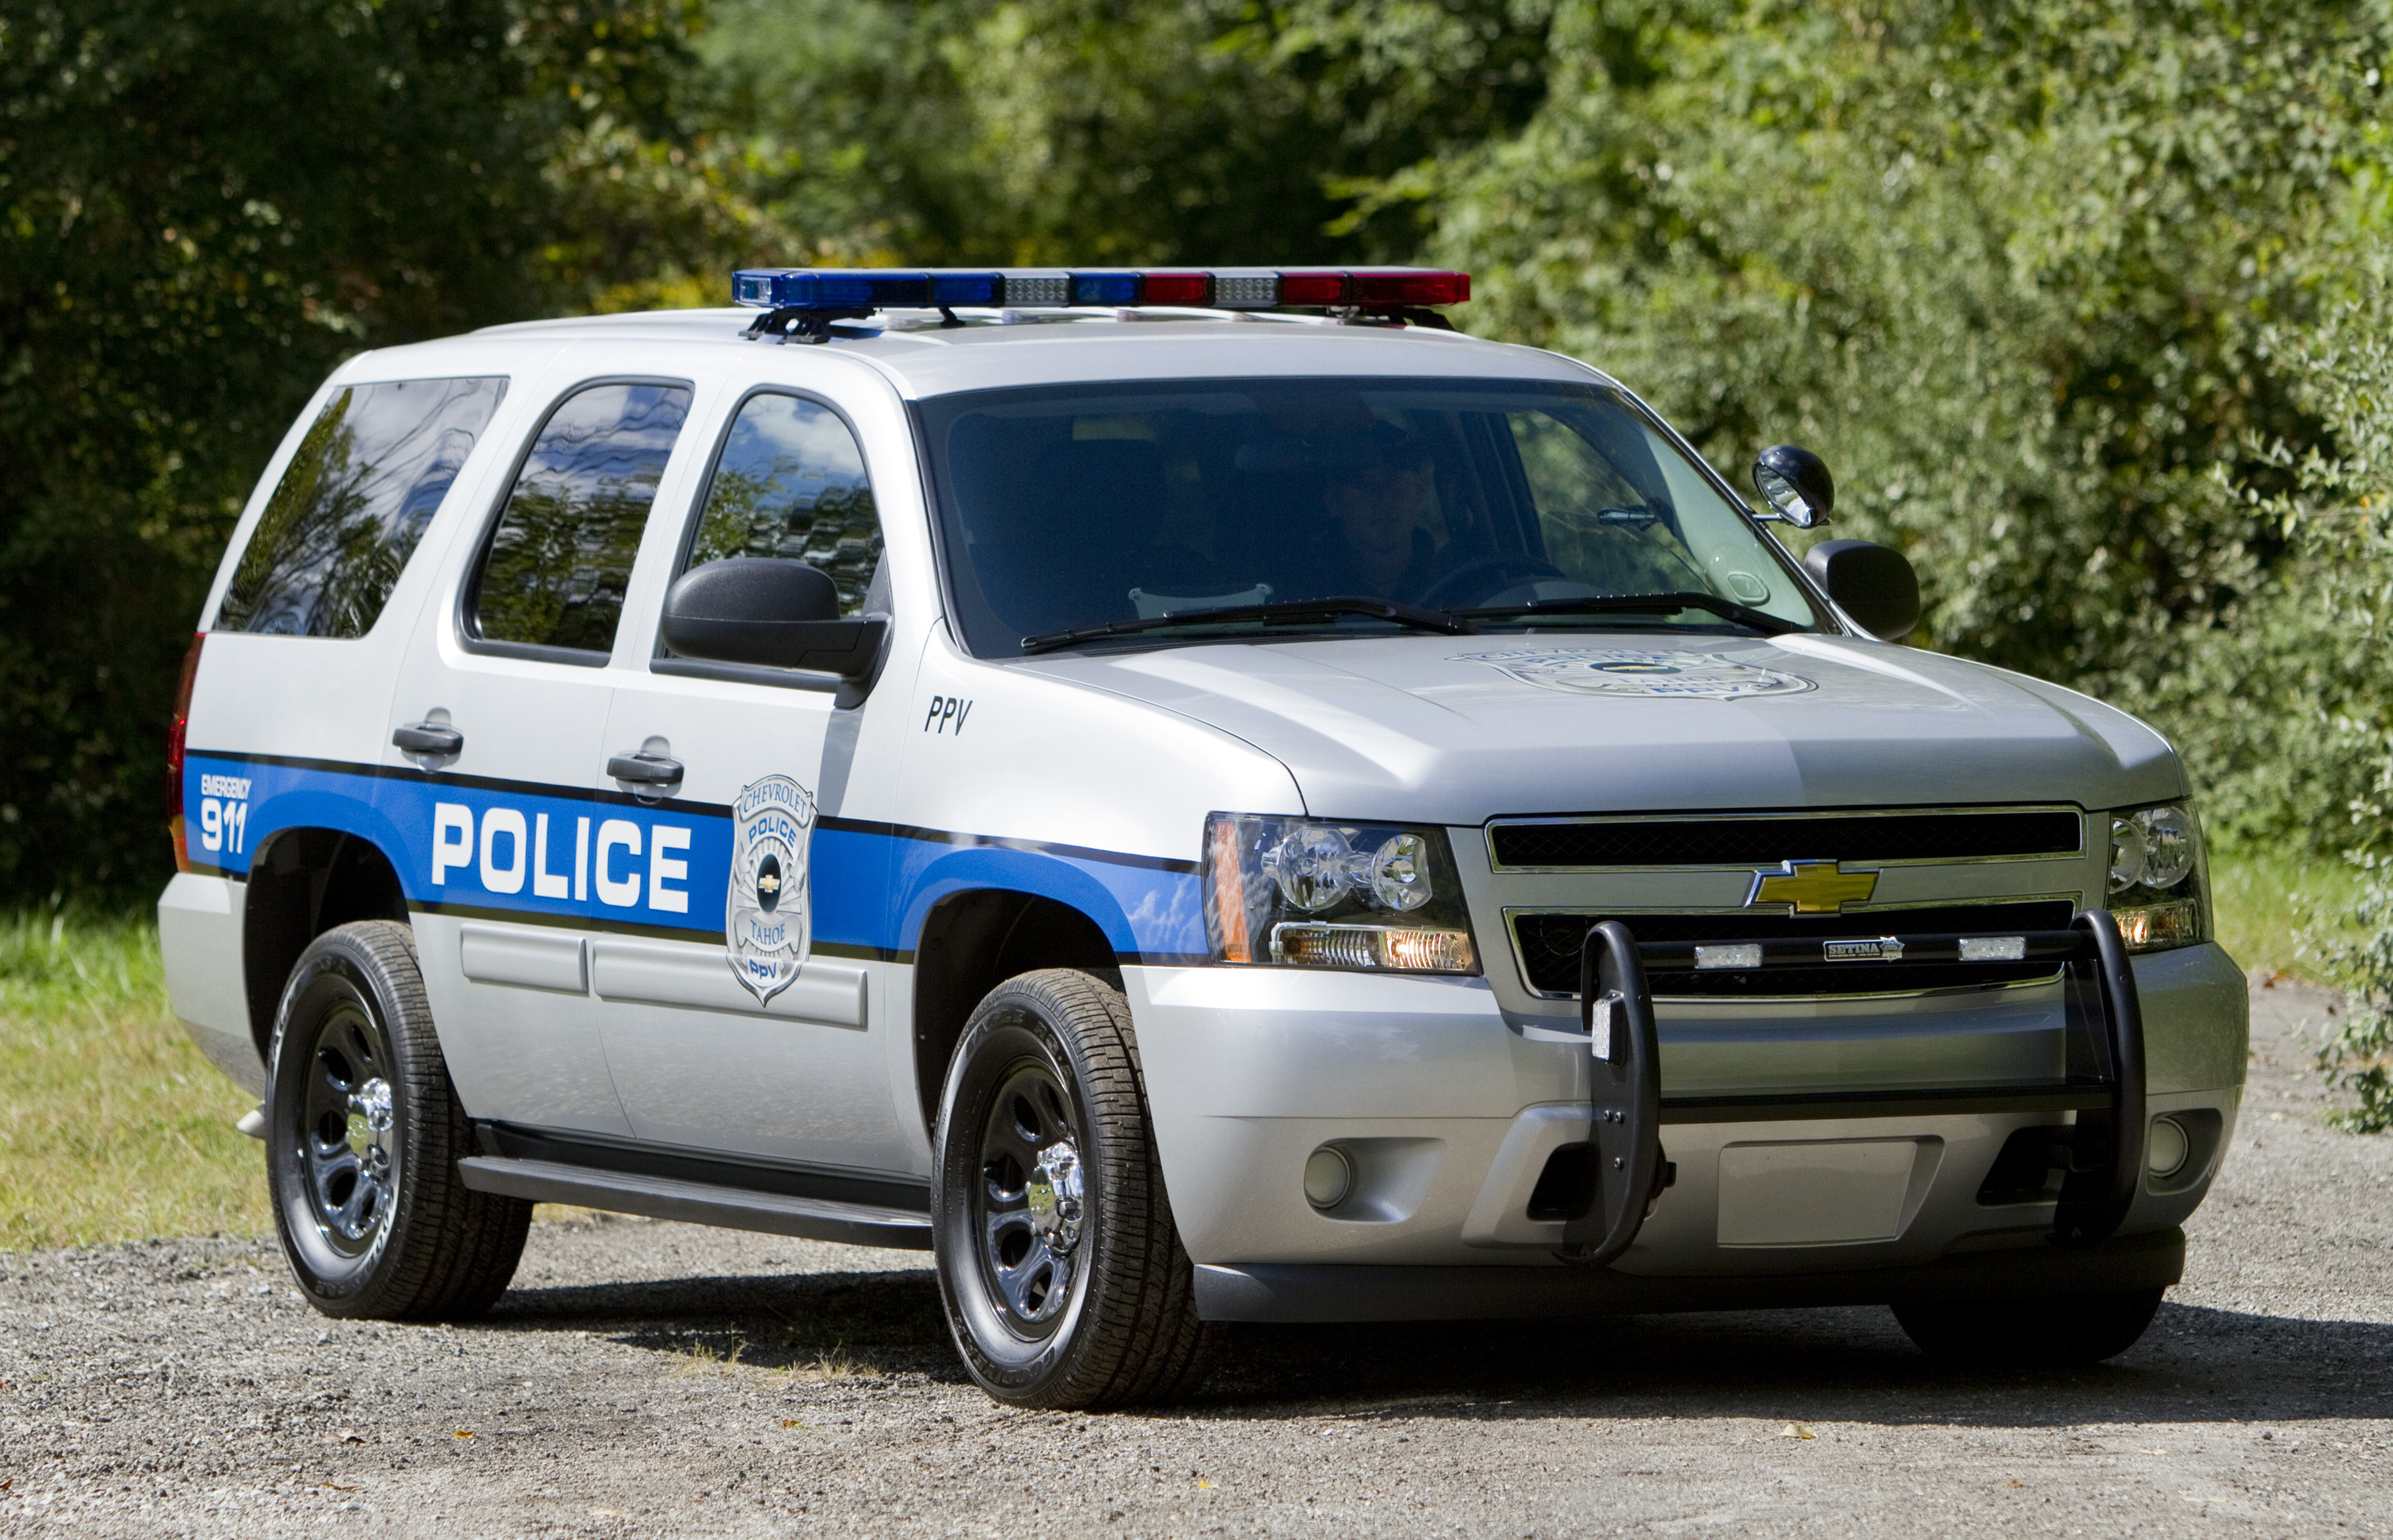 2012 Chevrolet Tahoe PPV image. â€œWith the Tahoe PPV, police officers get